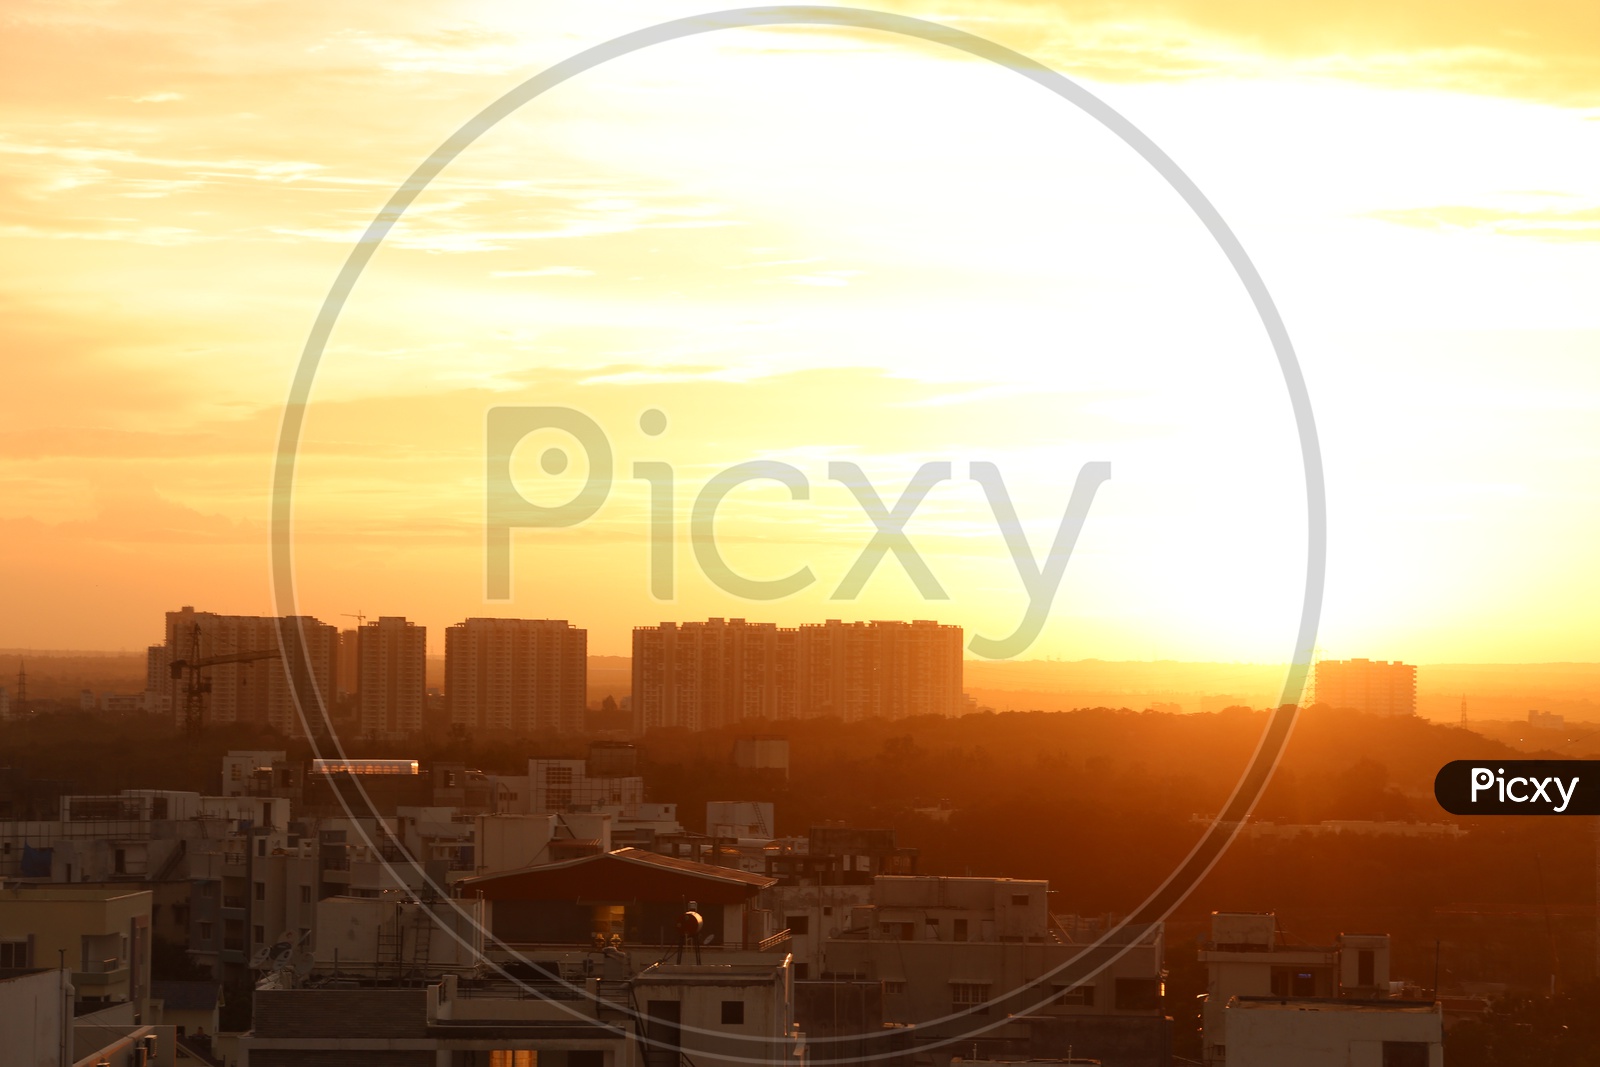 City Scape With High Rise Building And Apartments Over Sunset Sky